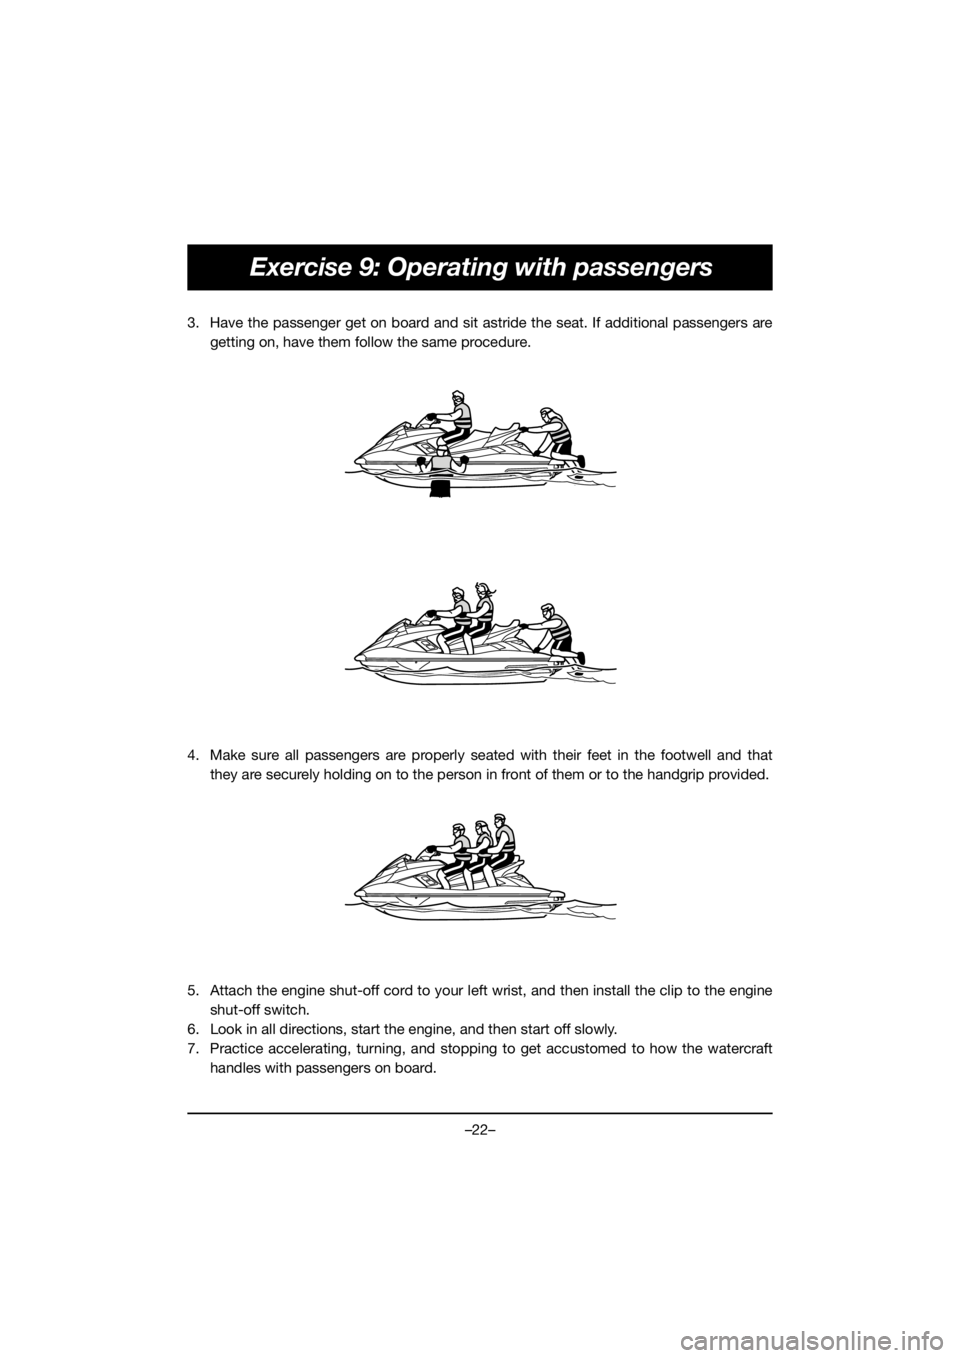 YAMAHA FX HO 2020  Notices Demploi (in French) –22–
Exercise 9: Operating with passengers
3. Have the passenger get on board and sit astride the seat. If additional passengers are
getting on, have them follow the same procedure.
4. Make sure a